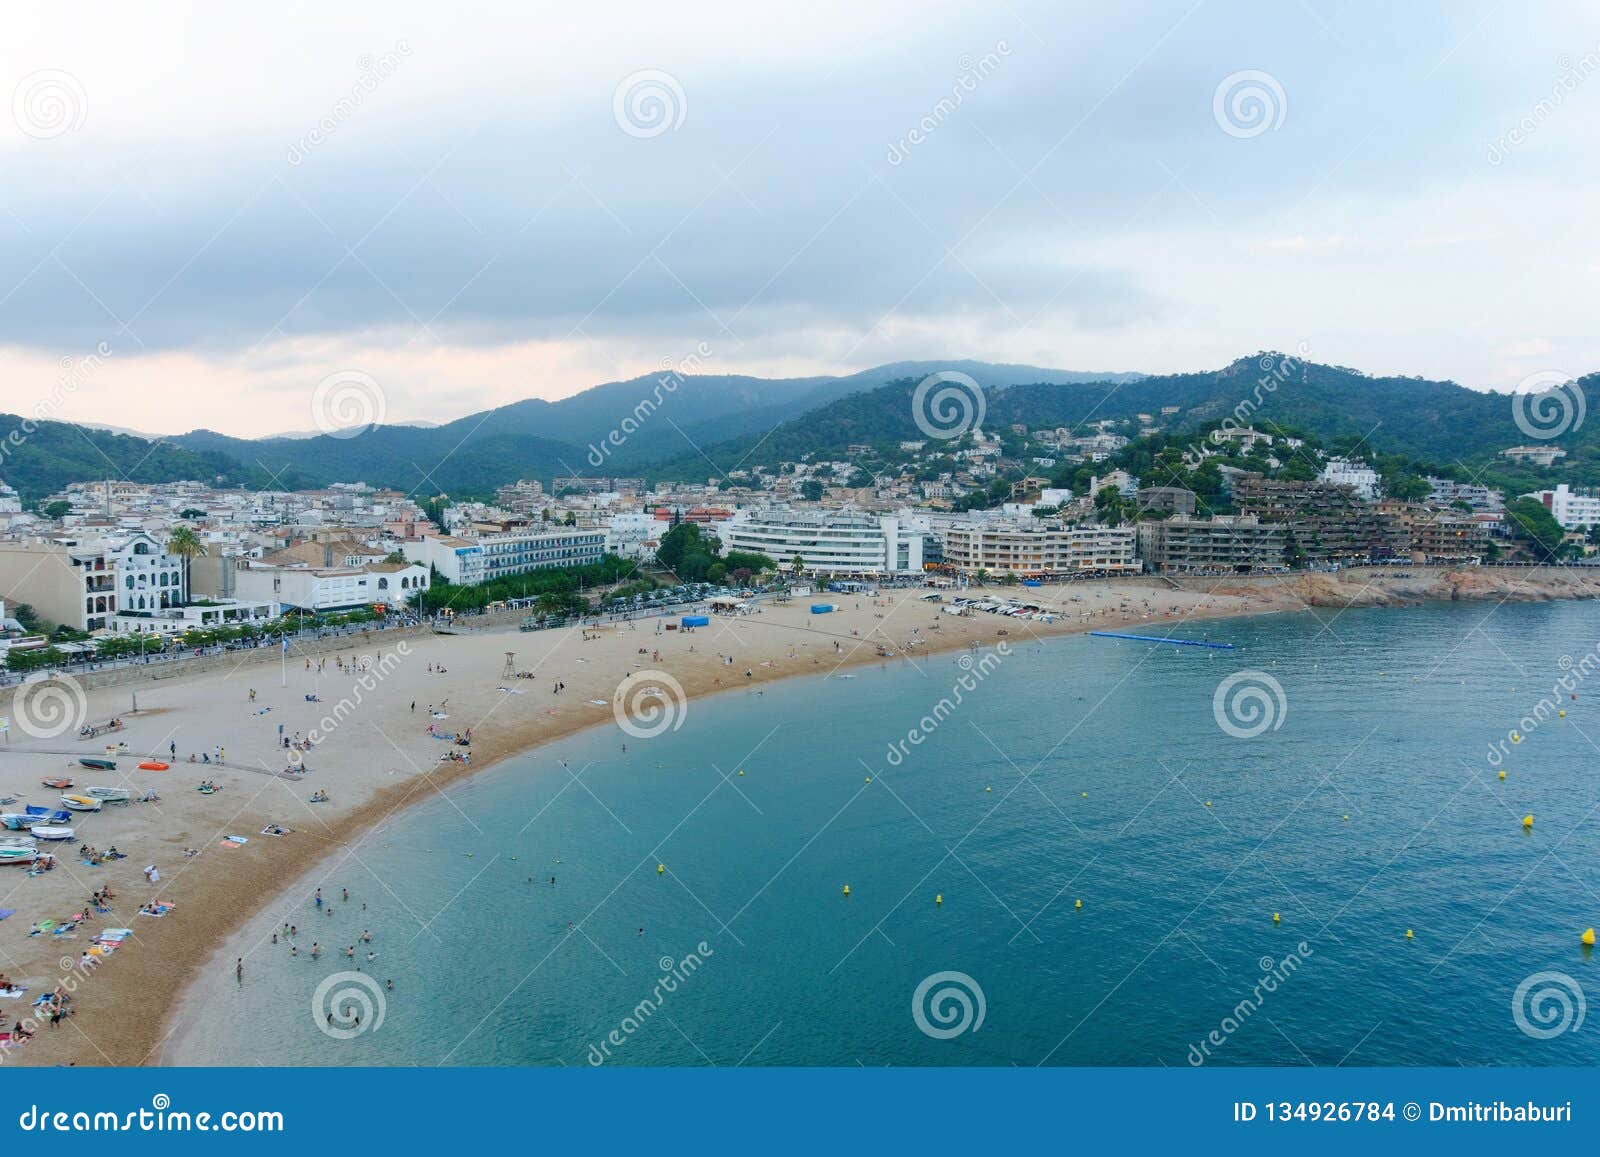 malgrat de mar, catalonia, spain, august 2018. view of the beach, the city and the distant mountains from the walls of the old for